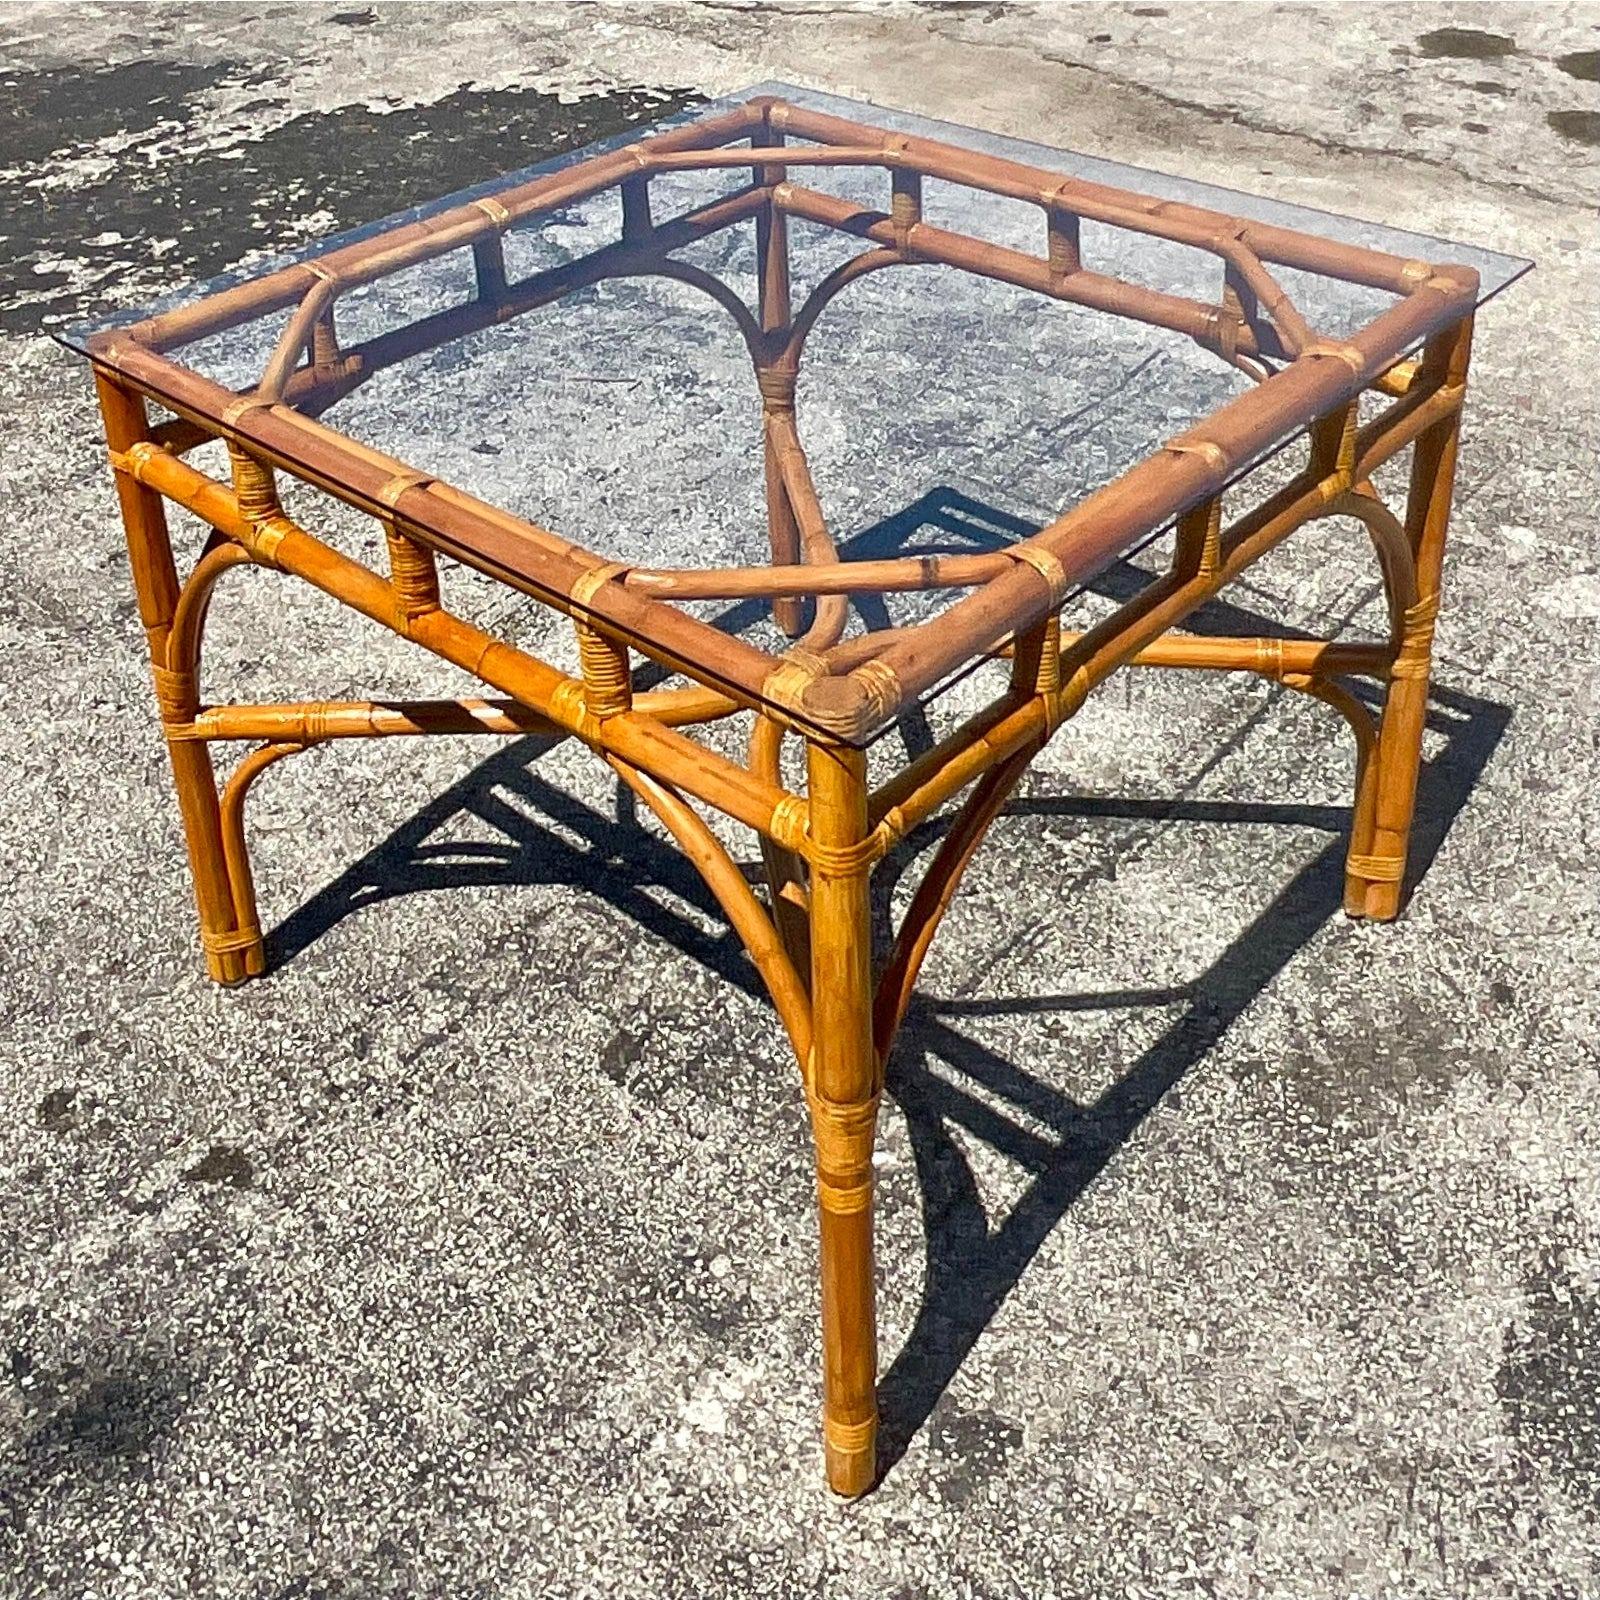 A fabulous vintage Coastal game table. Chic bent rattan with a clean and simple design. Acquired from a Palm Beach estate.